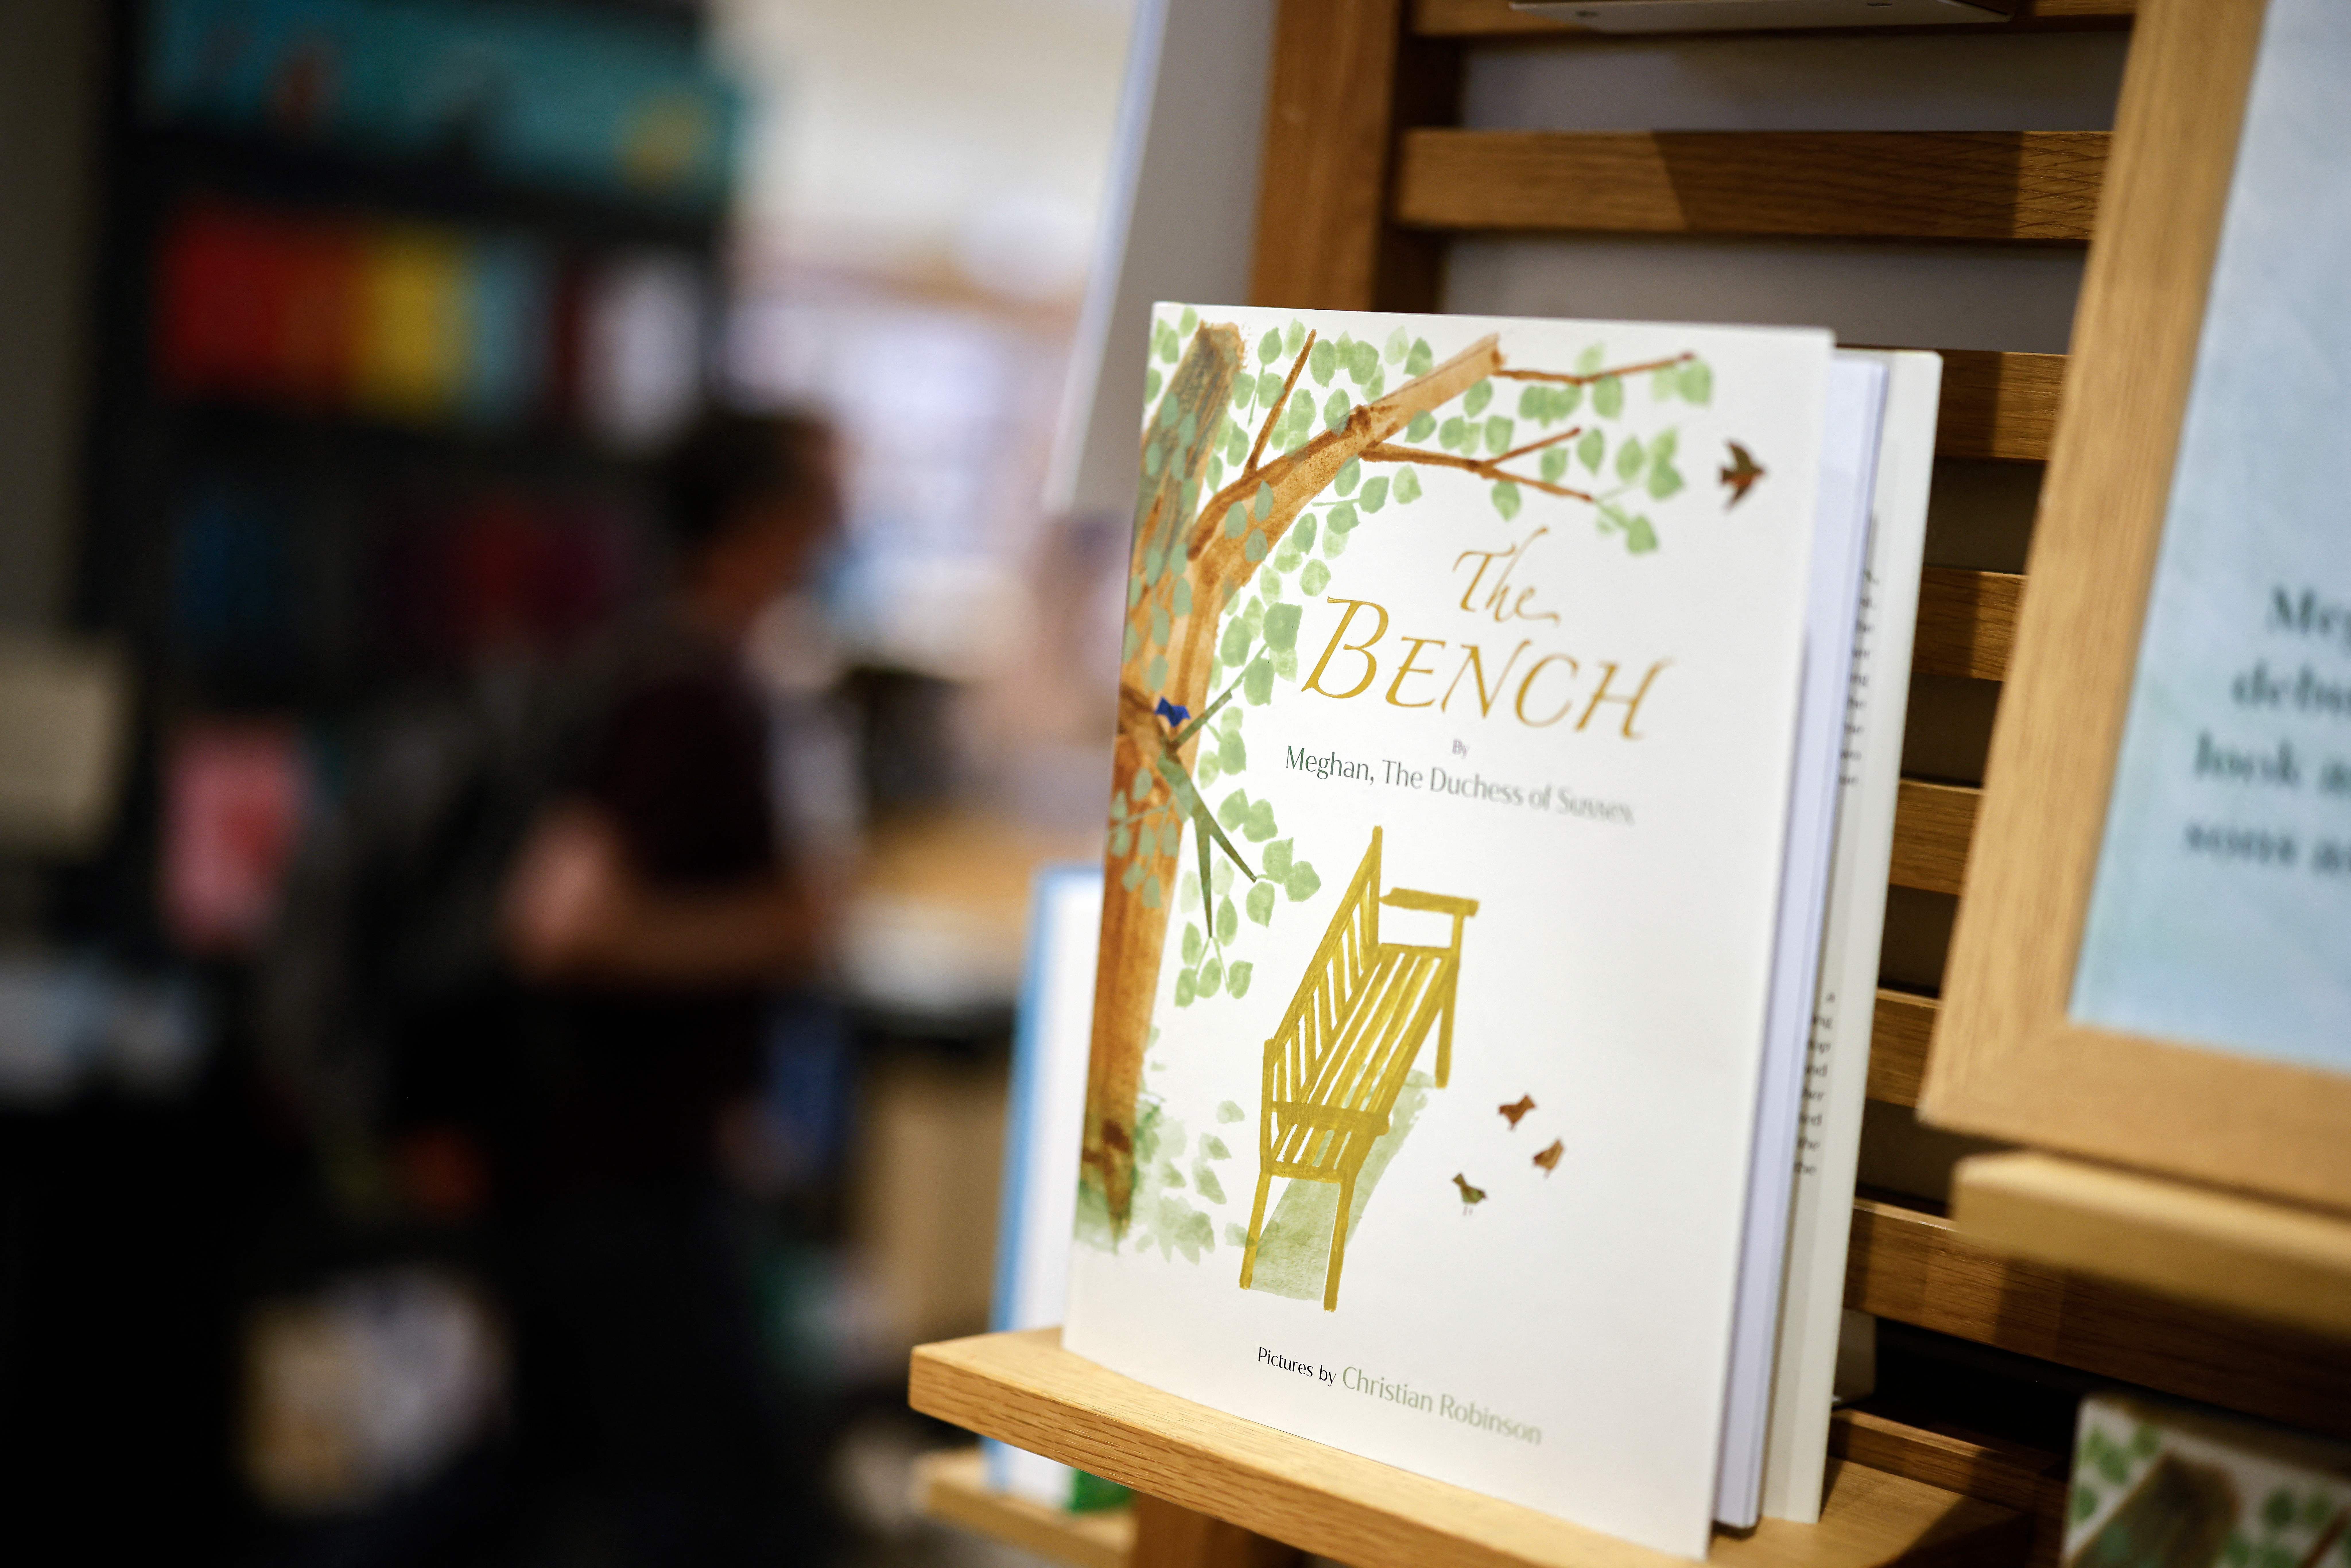 Children's book 'The Bench' by Meghan Markle on display in a bookshop in London on June 8, 2021, following its release | Photo: Getty Images